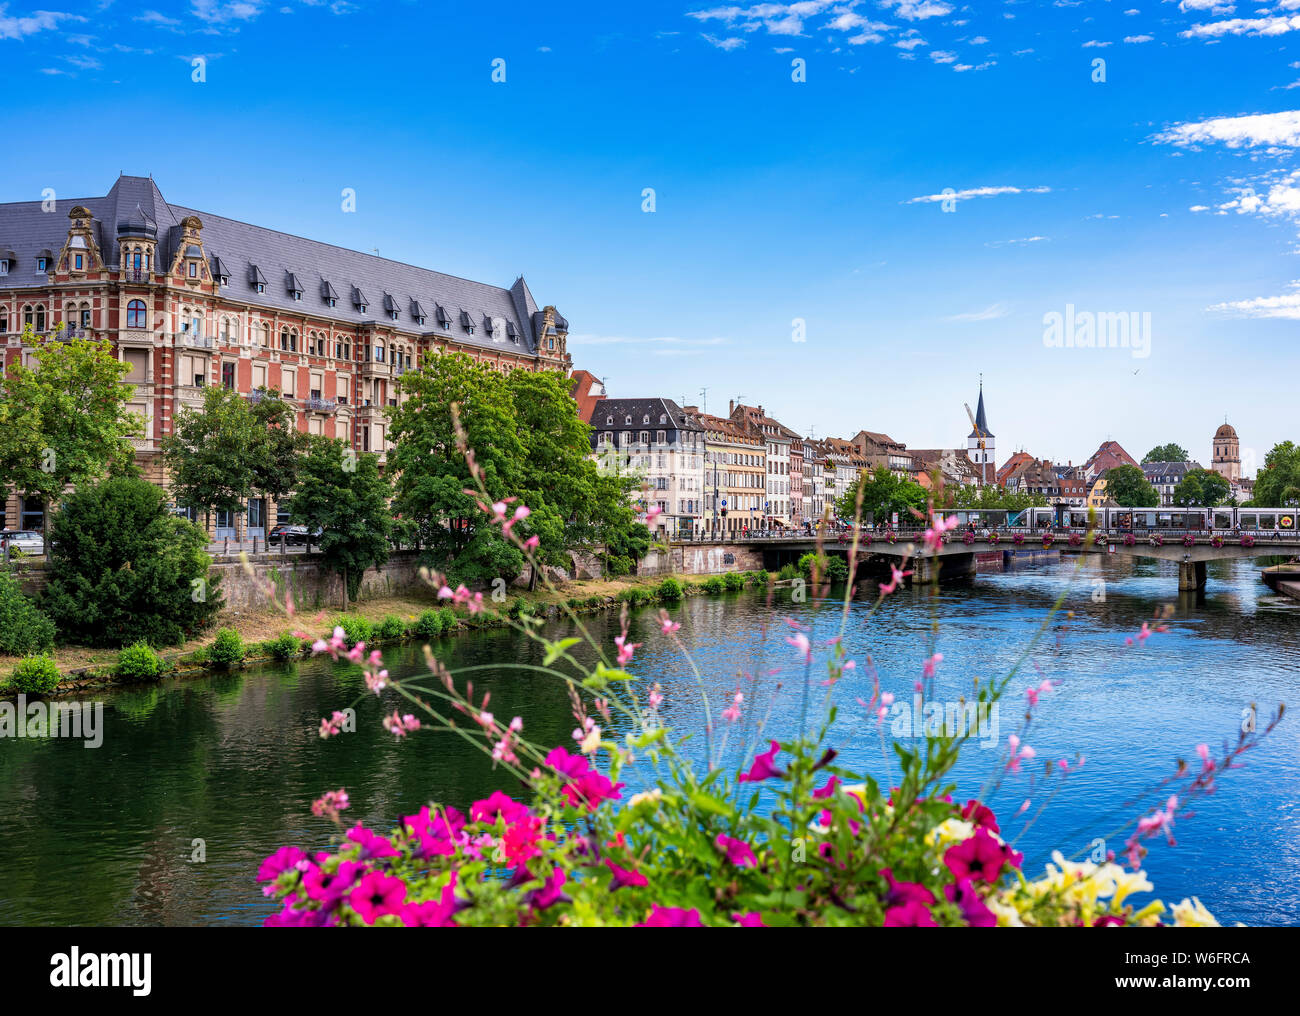 Gallia building, student residence,  dorm accomodation, Ill river, waterfront houses perspective, Strasbourg, Alsace, France, Europe, Stock Photo